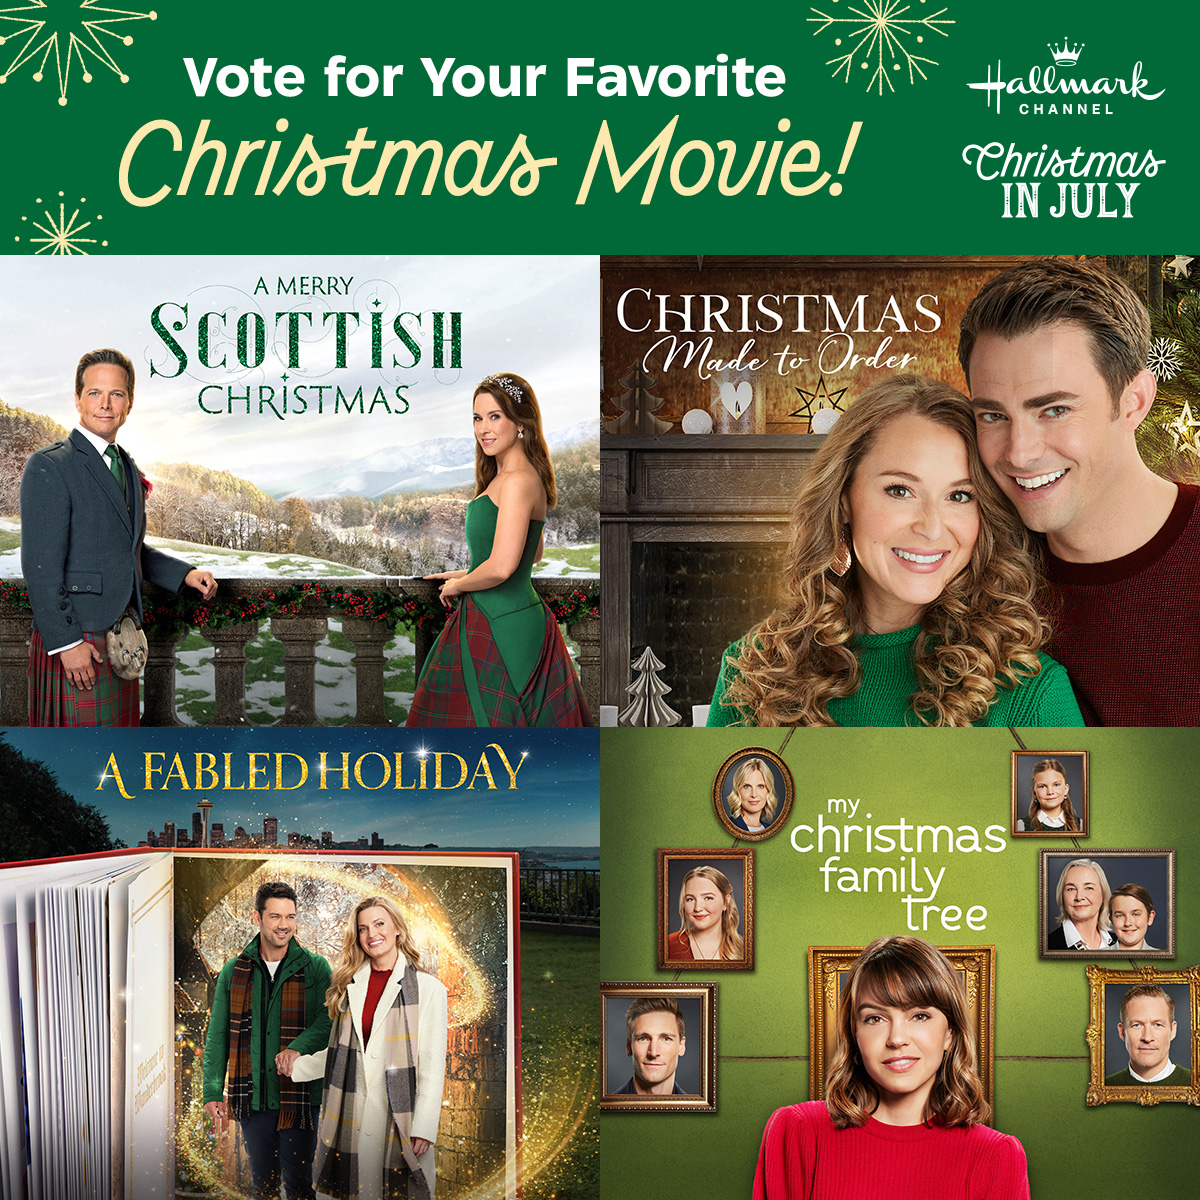 Ready for another #ChristmasInJuly Fan Favorite marathon poll? Your choices are:
 
#AMerryScottishChristmas
#ChristmasMadeToOrder
#AFabledHoliday
#MyChristmasFamilyTree

Reply with your favorite for a chance to see it in July!